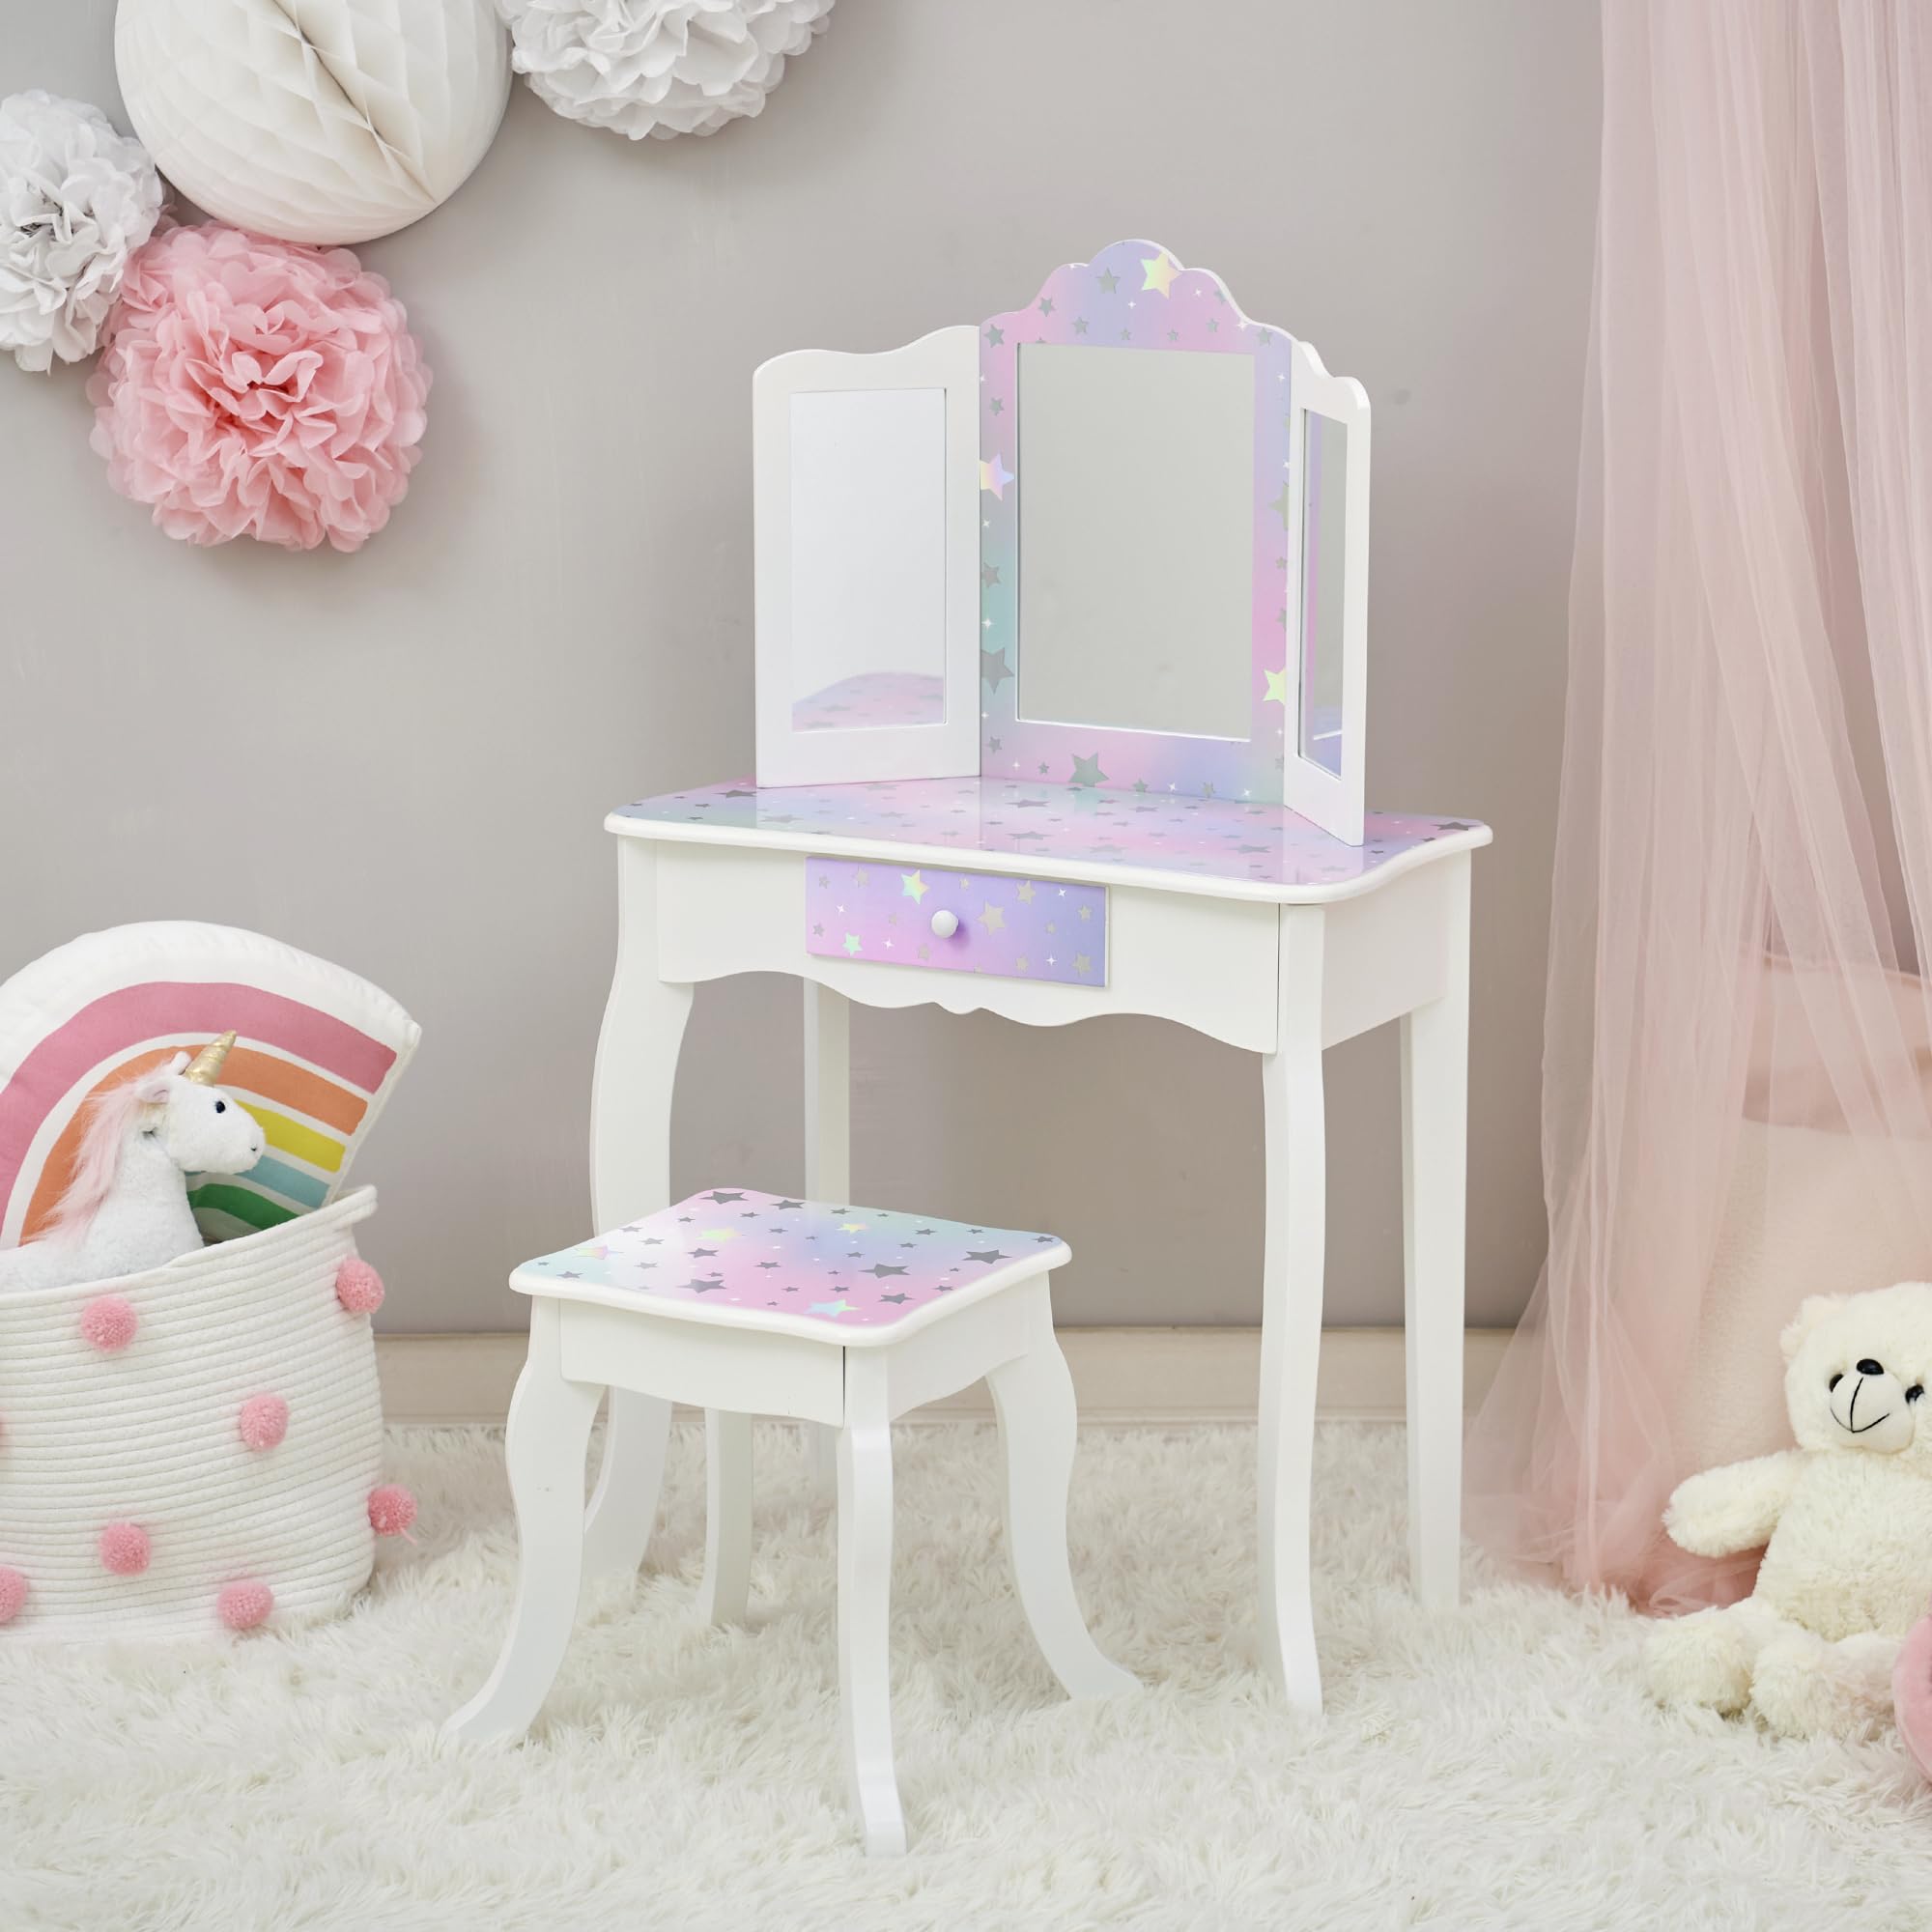 Teamson Kids - Pretend Play Kids Vanity, Table and Chair Vanity Set with Mirror Makeup Dressing Table with Drawer, Starry Sky Print Gisele Play Vanity Set, White/Lavender, Gift for Ages 3+